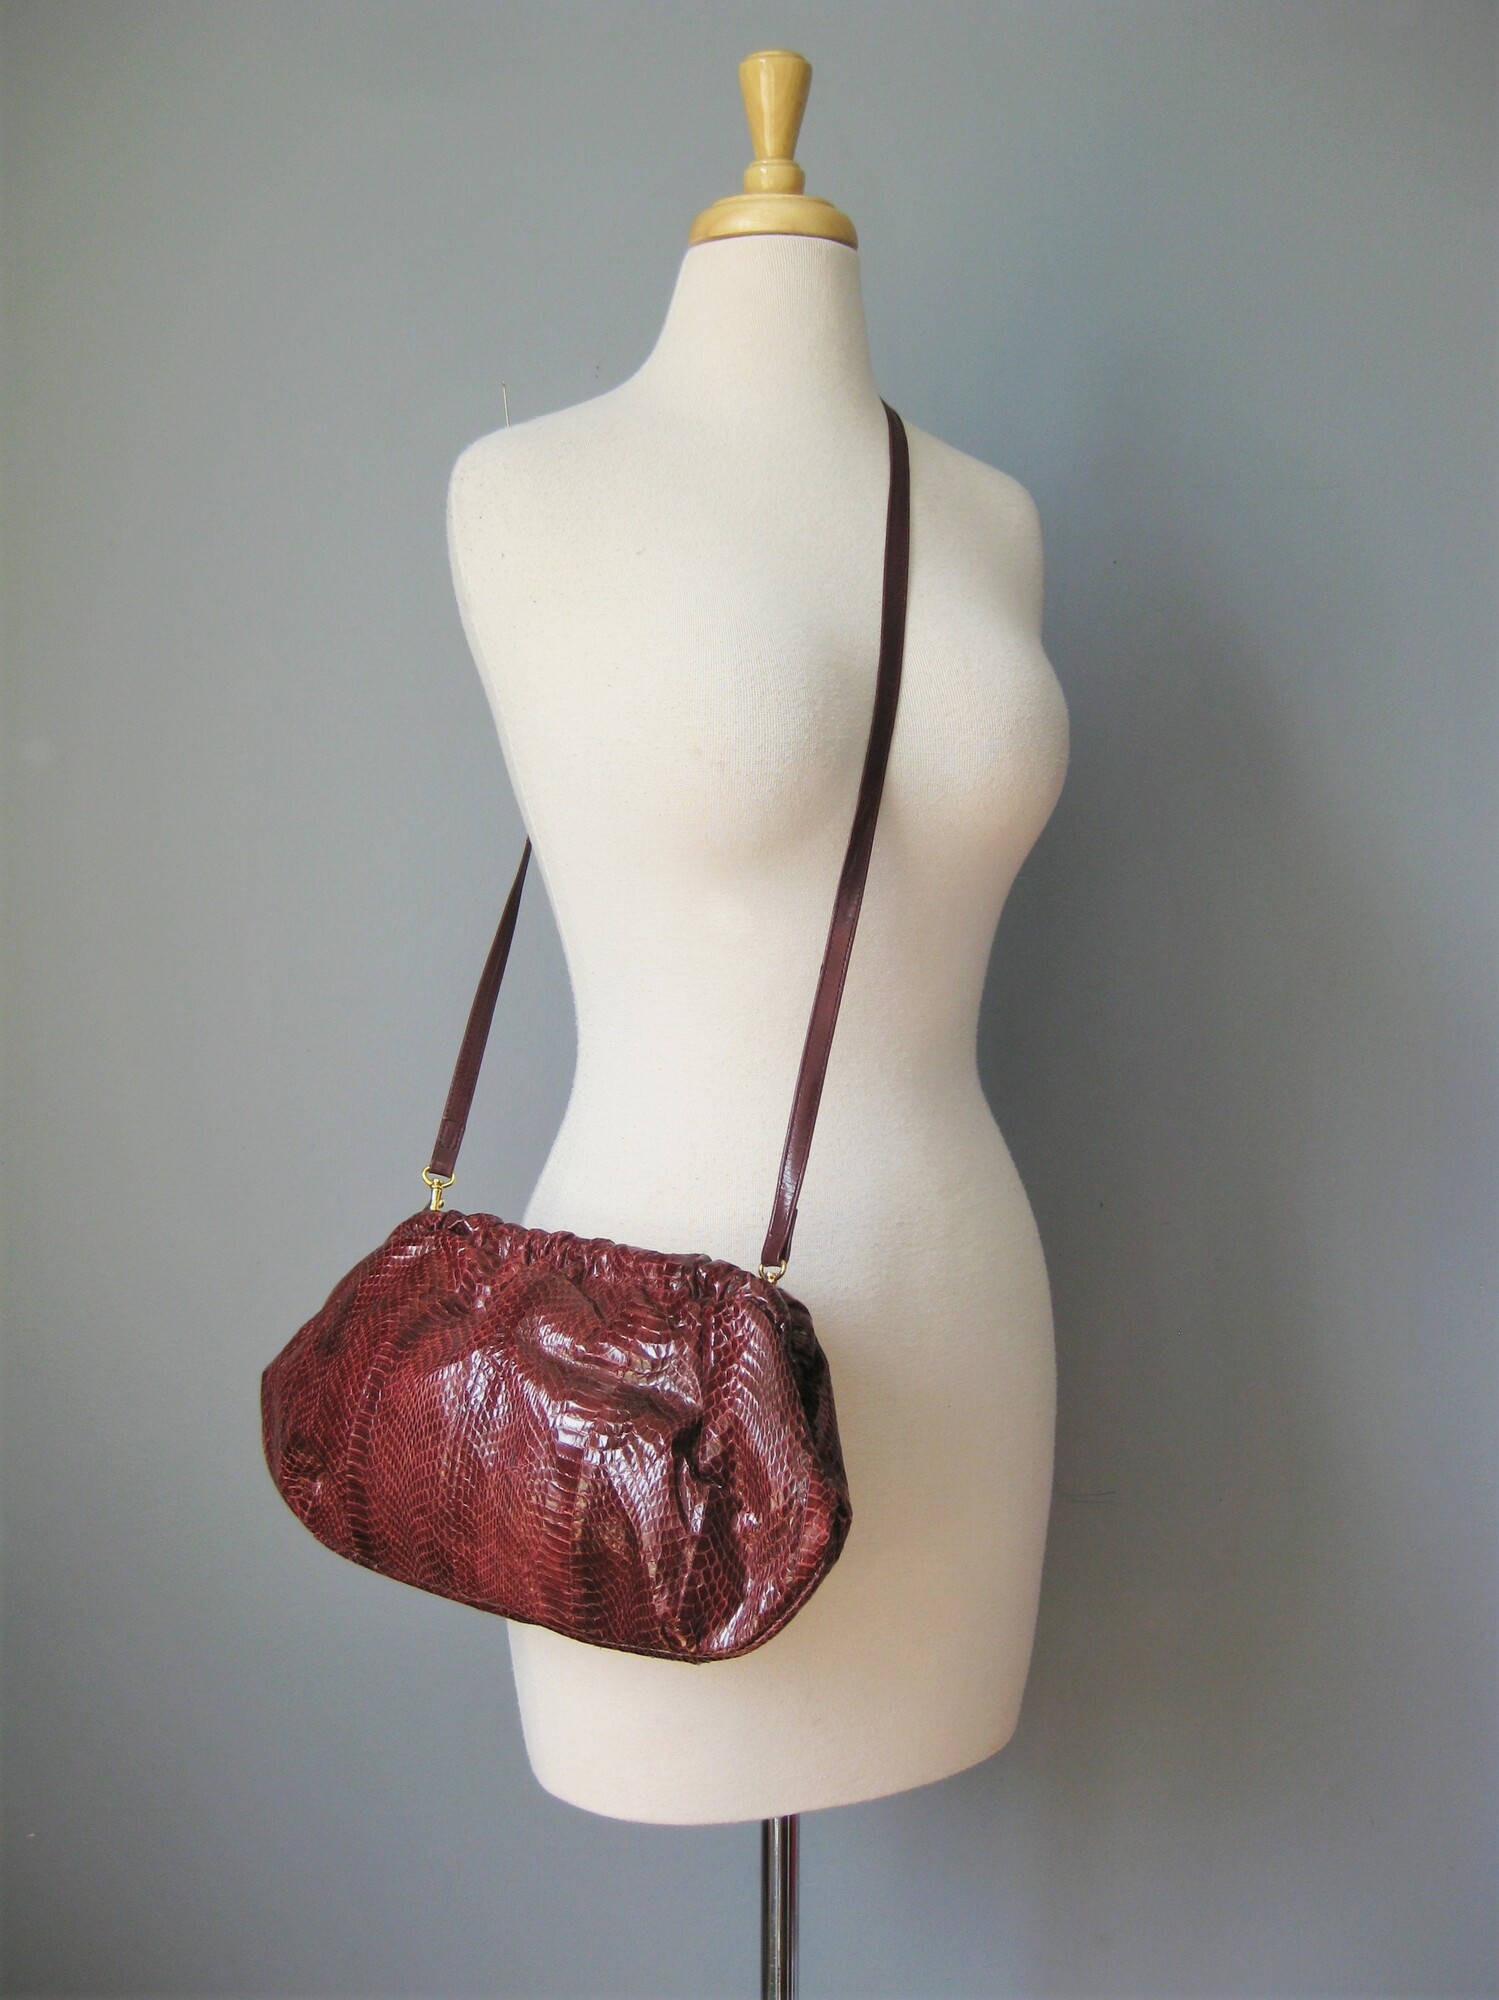 J Rene Snakeskin, Red, Size: None
J Renee puffy snakeskin purse works for day or night.  Burgundy snakeskin hinged clutch with a detachable crossbody strap.  Never Worn, original department store tags inside

Measurements:
Width: 14.5
Height: 8.25
Depth: aprox. 4 1/2
Strap Drop: 19

Thanks for looking!

#42154